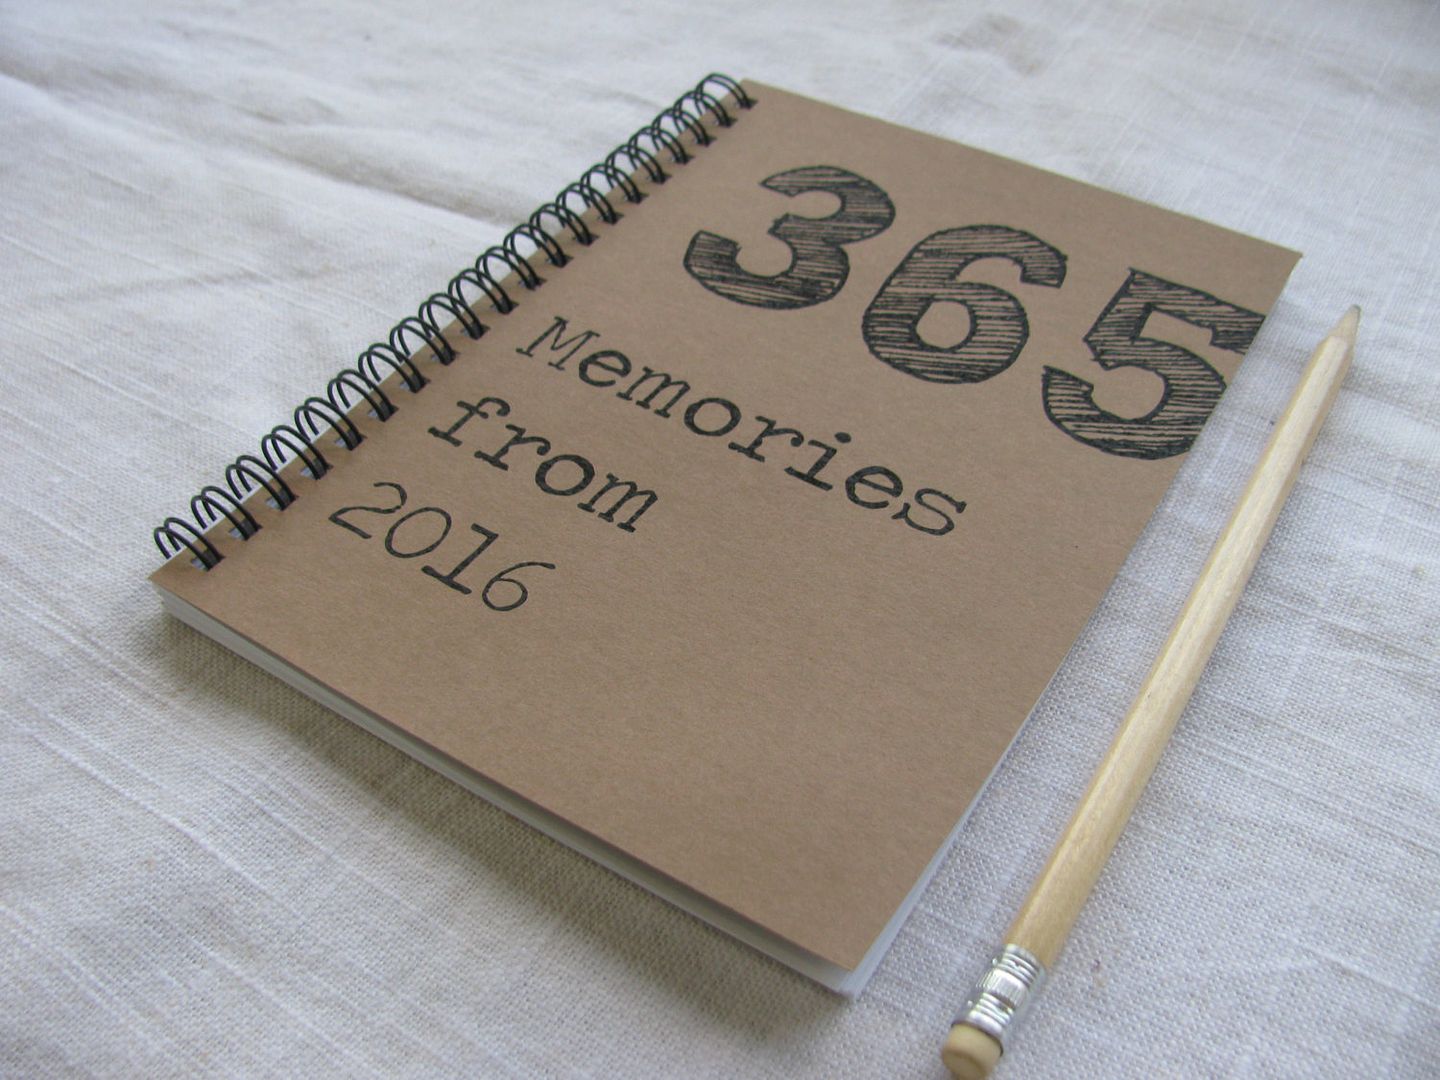 365 memories to make in 2016: Cool journal gift for a partner or best friend